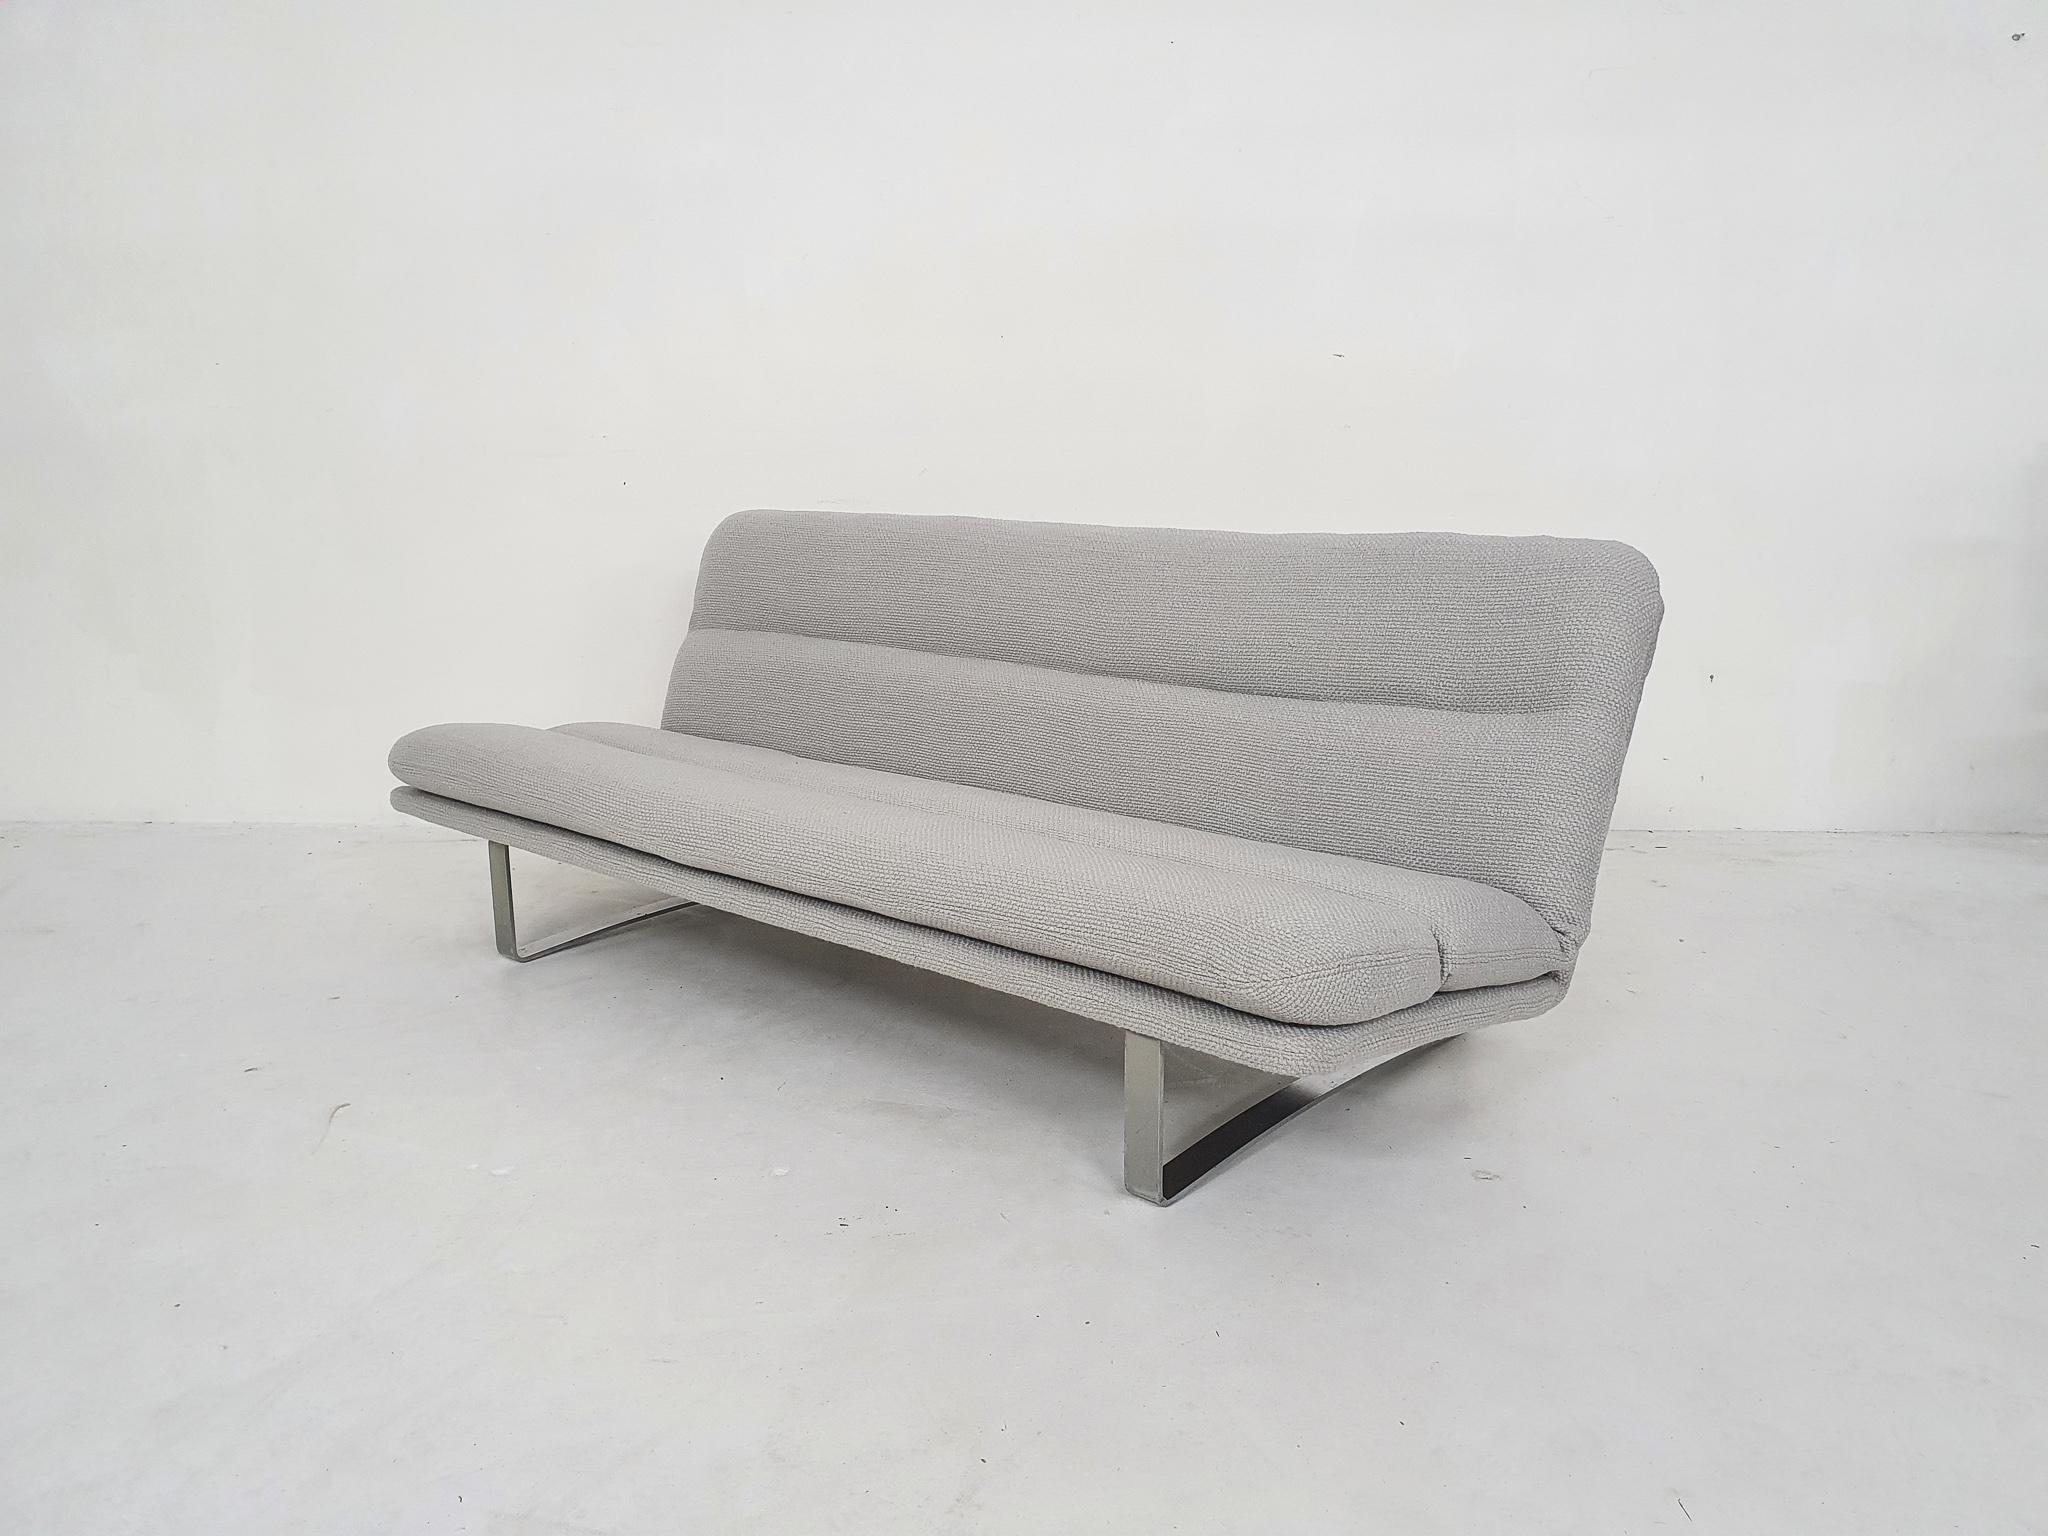 Kho Liang Ie for Artifort C683 sofa, The Netherlands 1968

Silver frame and new upholstered frame and cushion in a light grey all natural wool fabric.
The metal frame has some rust spots.

Kho Liang Ie (1927-1975) was a Dutch industrial